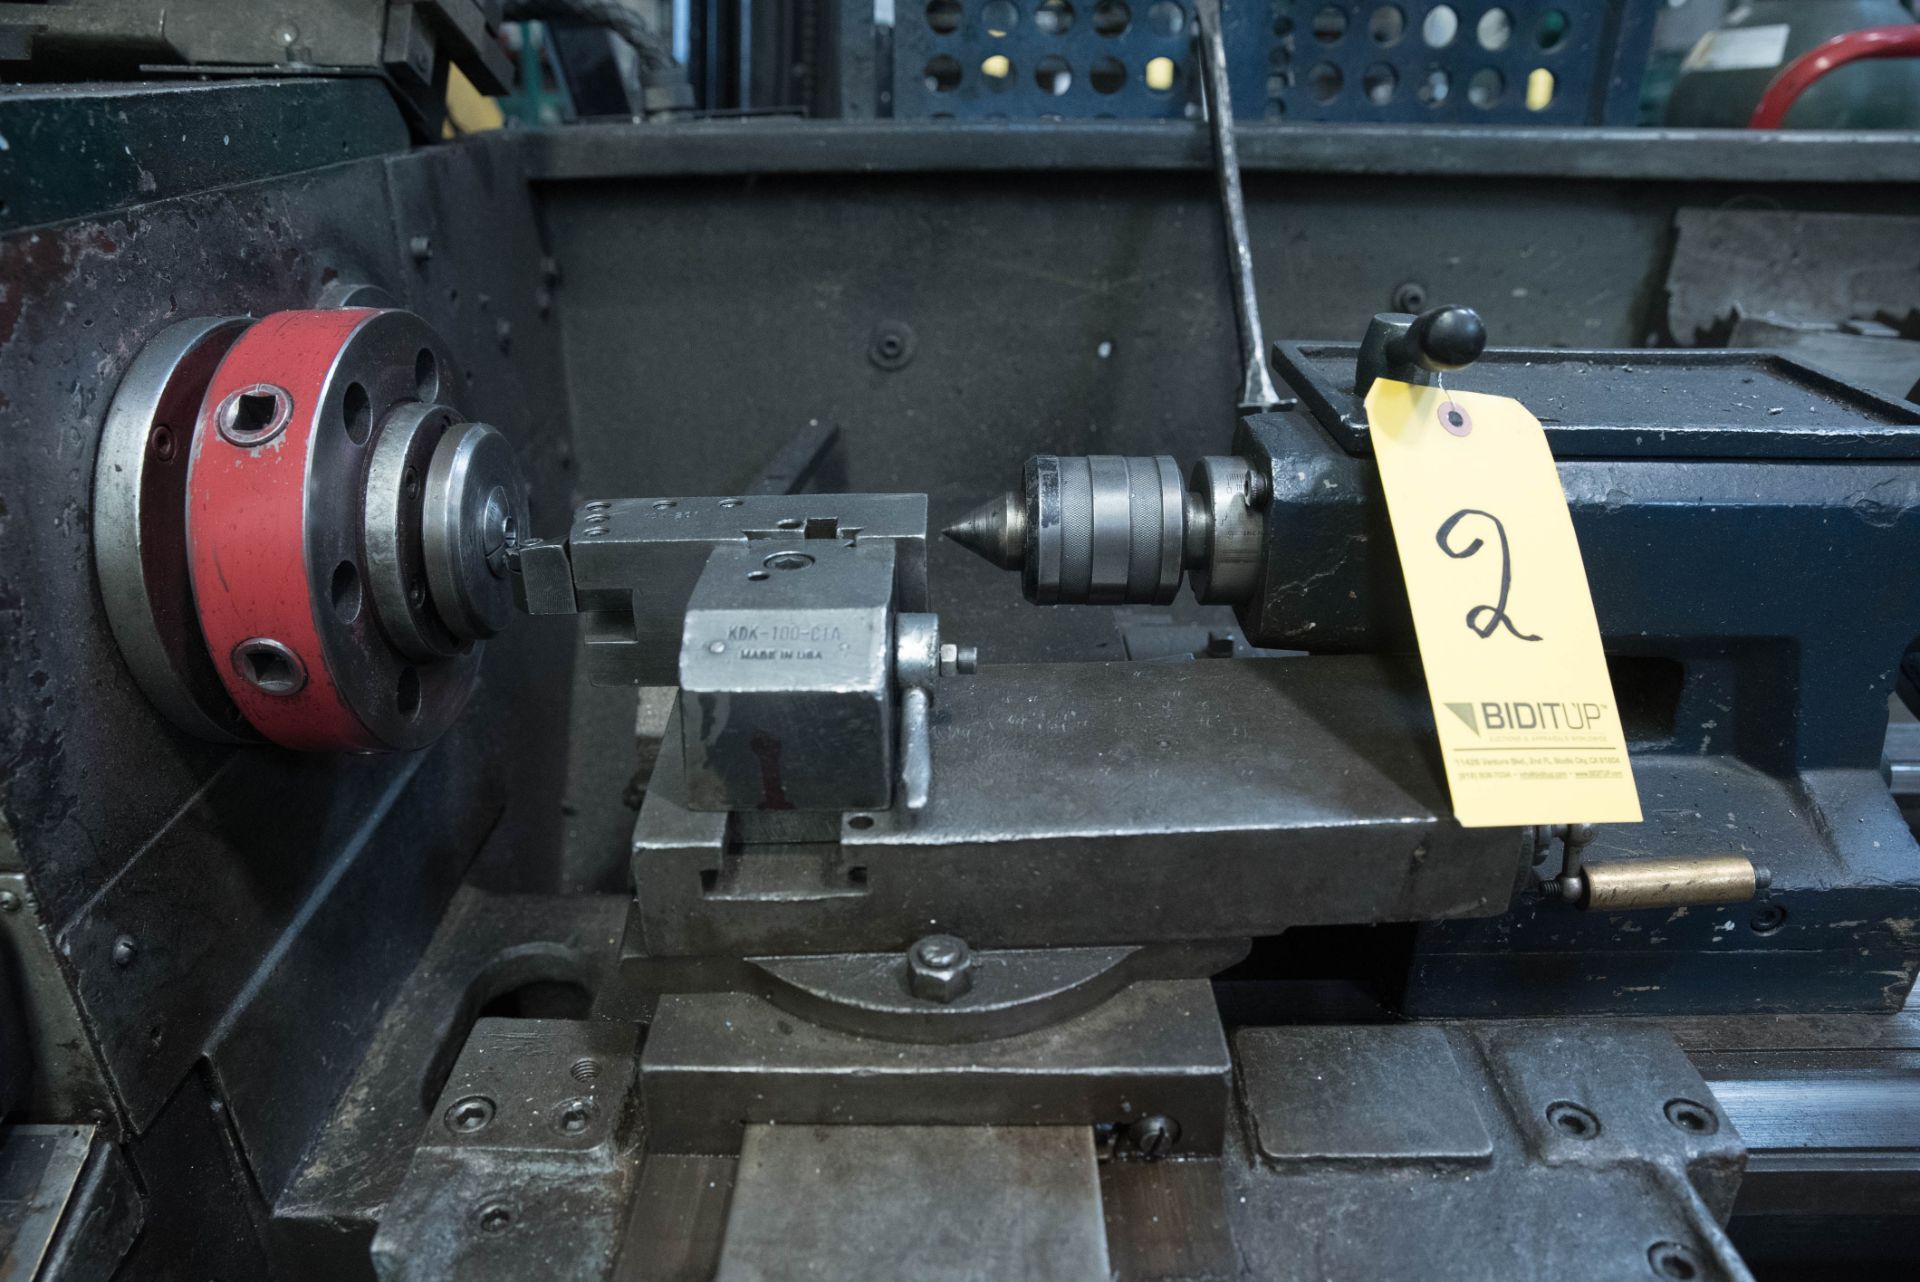 Select Machine Tool Co Mdl: C6232D Horizontal Engine Lathe, S/N JC1295 - Image 2 of 8